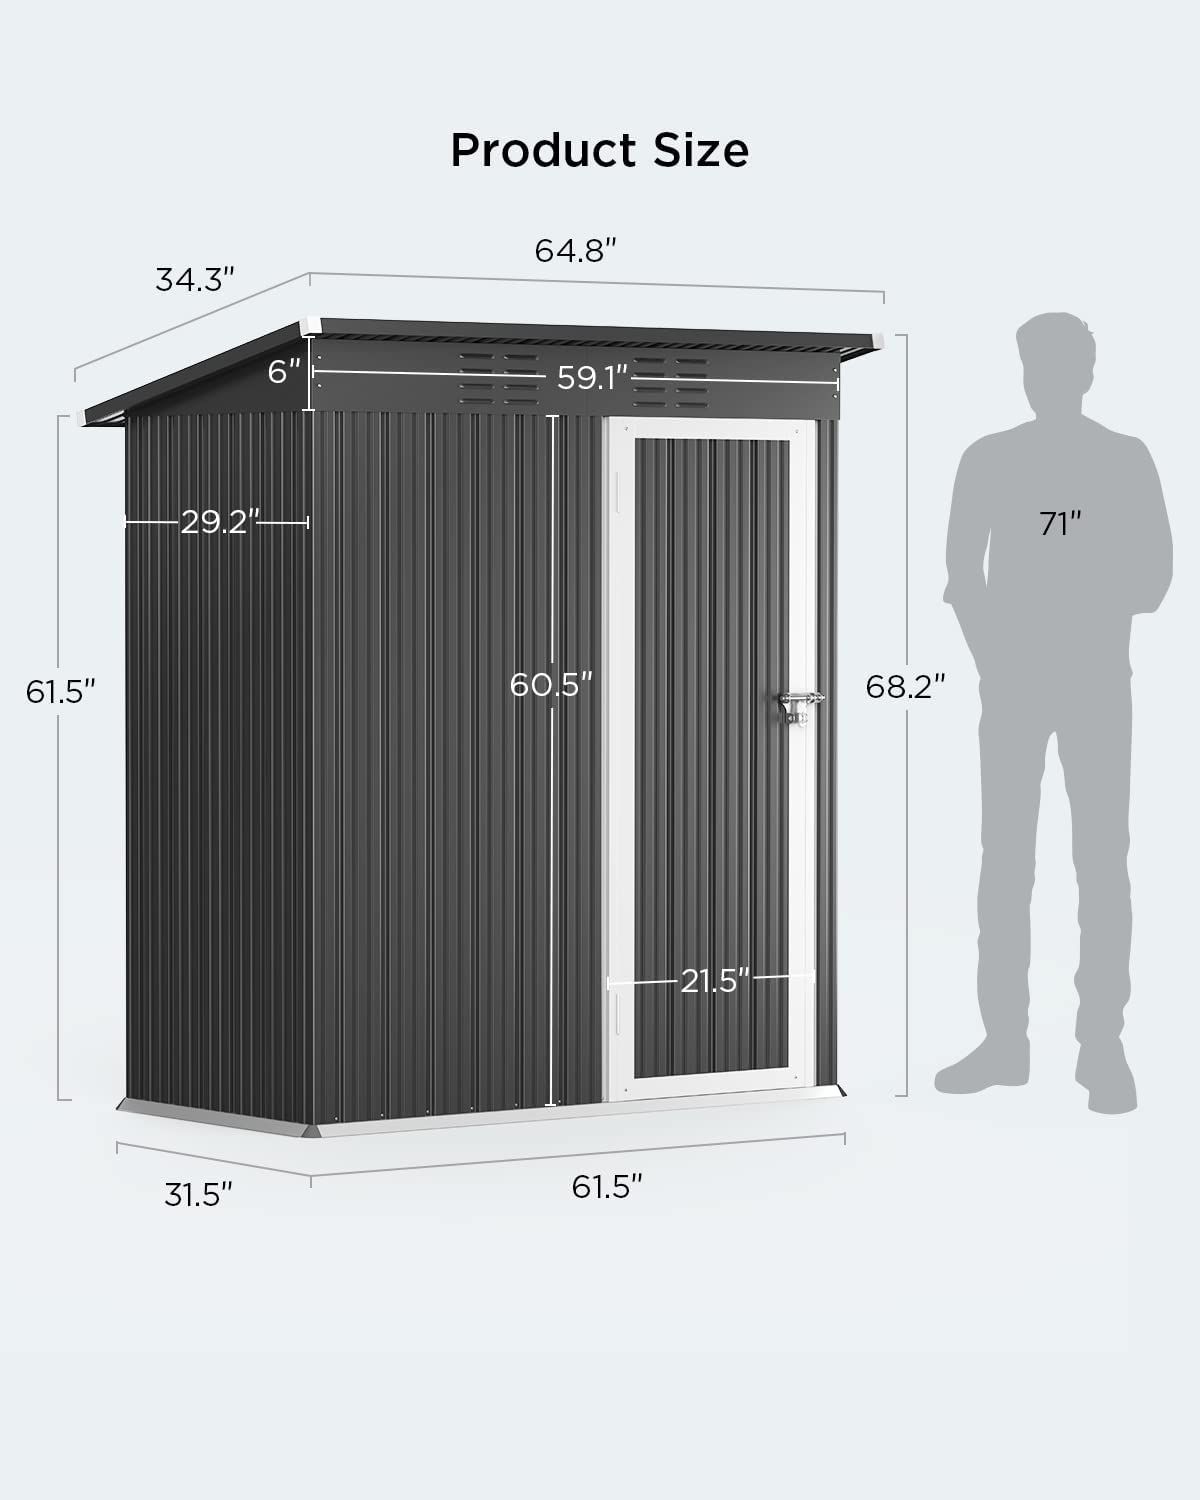 5' x 3' Outdoor Storage Shed, Metal Outdoor Storage Cabinet with Single Lockable Door, Waterproof Tool Shed,Gray - image 3 of 8